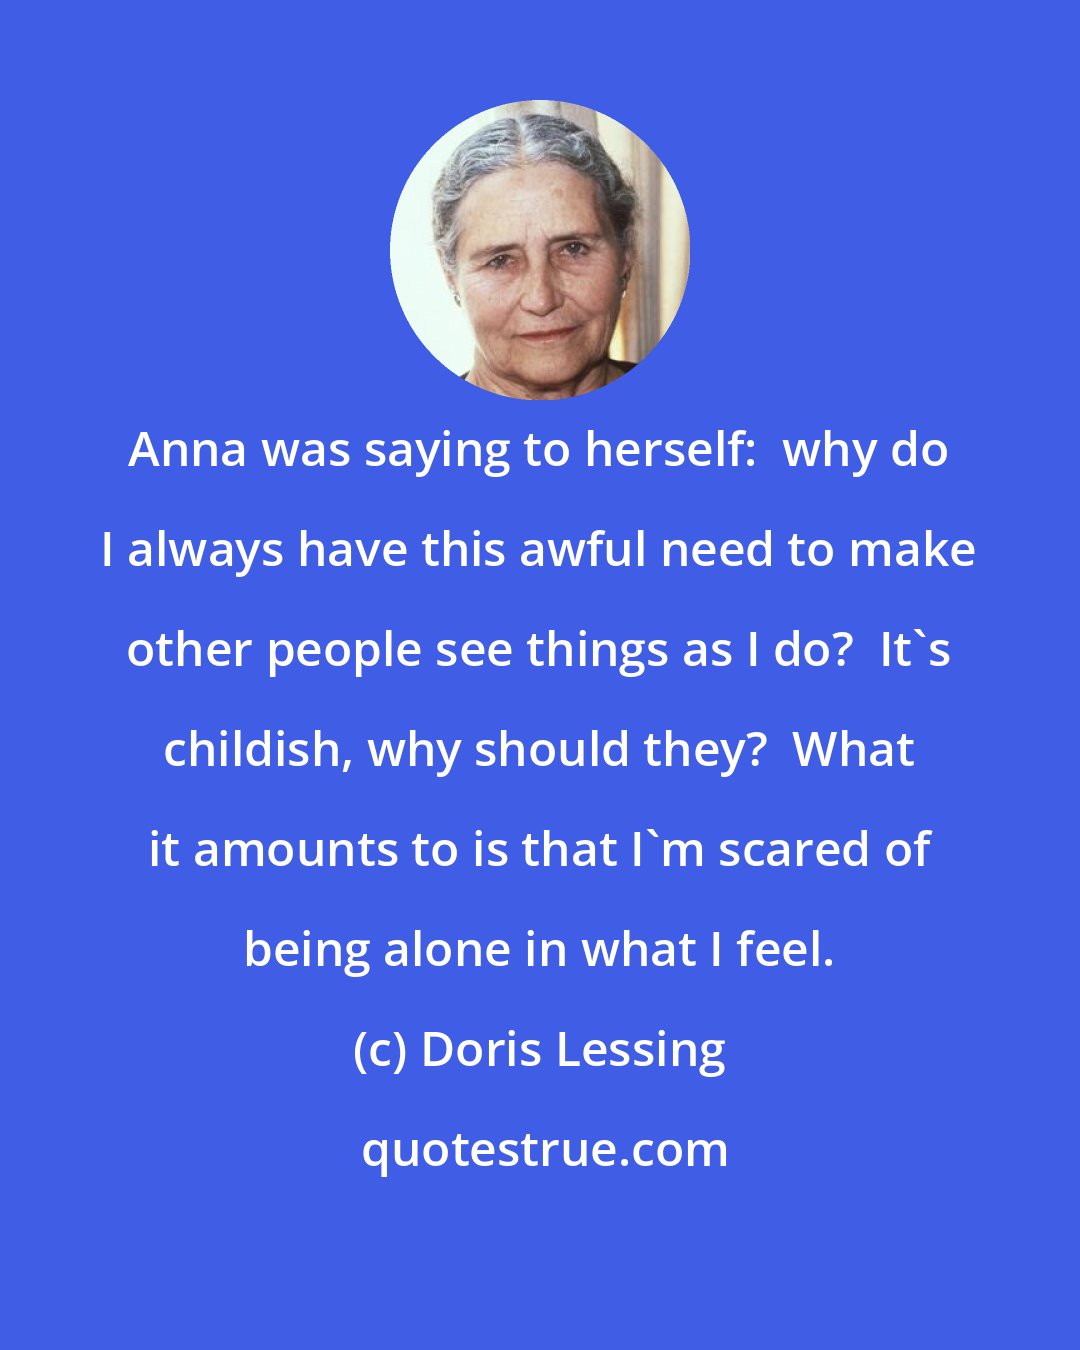 Doris Lessing: Anna was saying to herself:  why do I always have this awful need to make other people see things as I do?  It's childish, why should they?  What it amounts to is that I'm scared of being alone in what I feel.